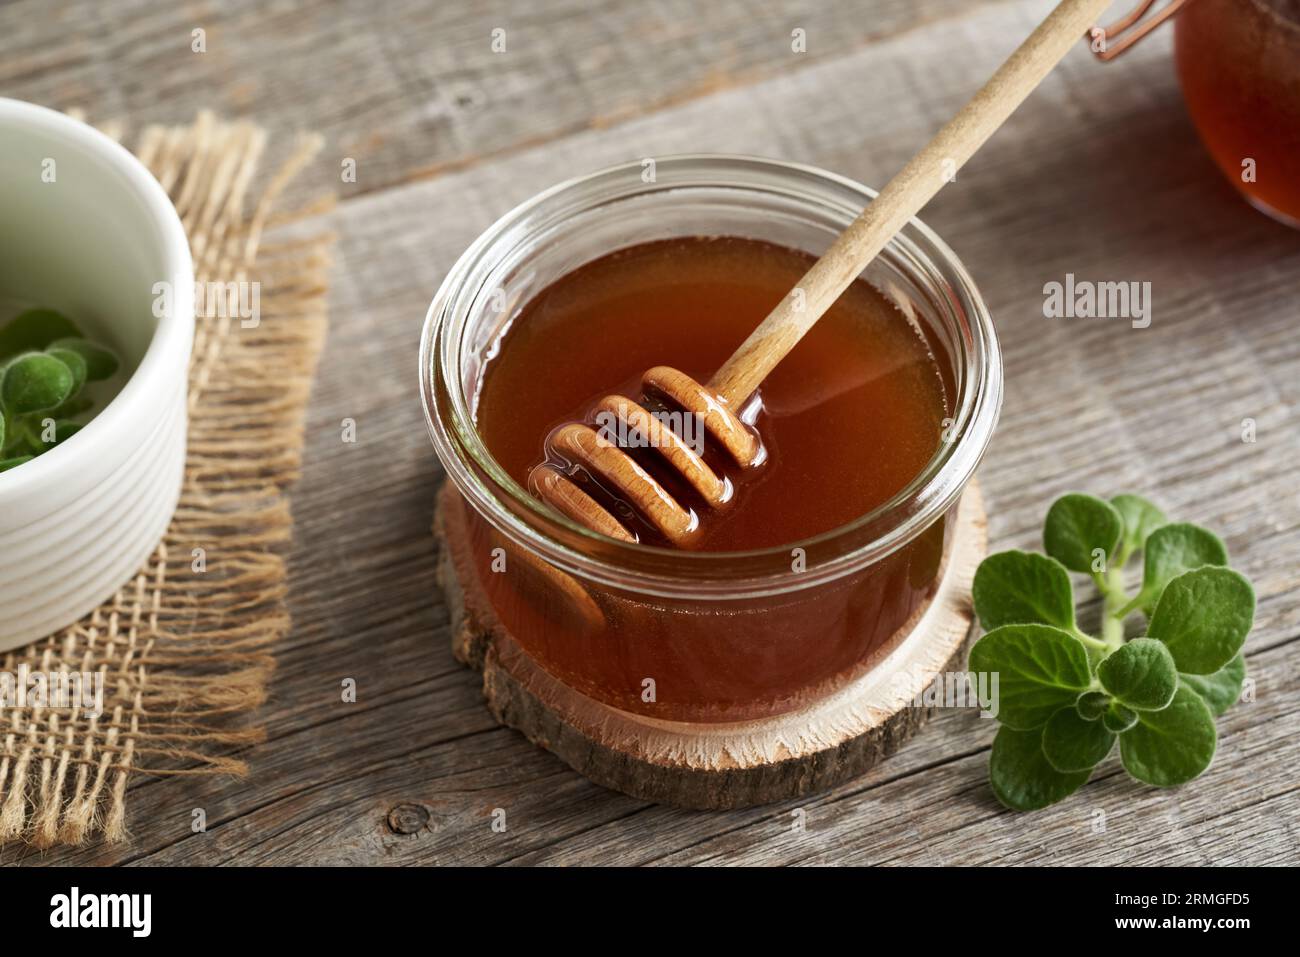 Coleus amboinicus syrup in a glass jar with a honey dipper Stock Photo